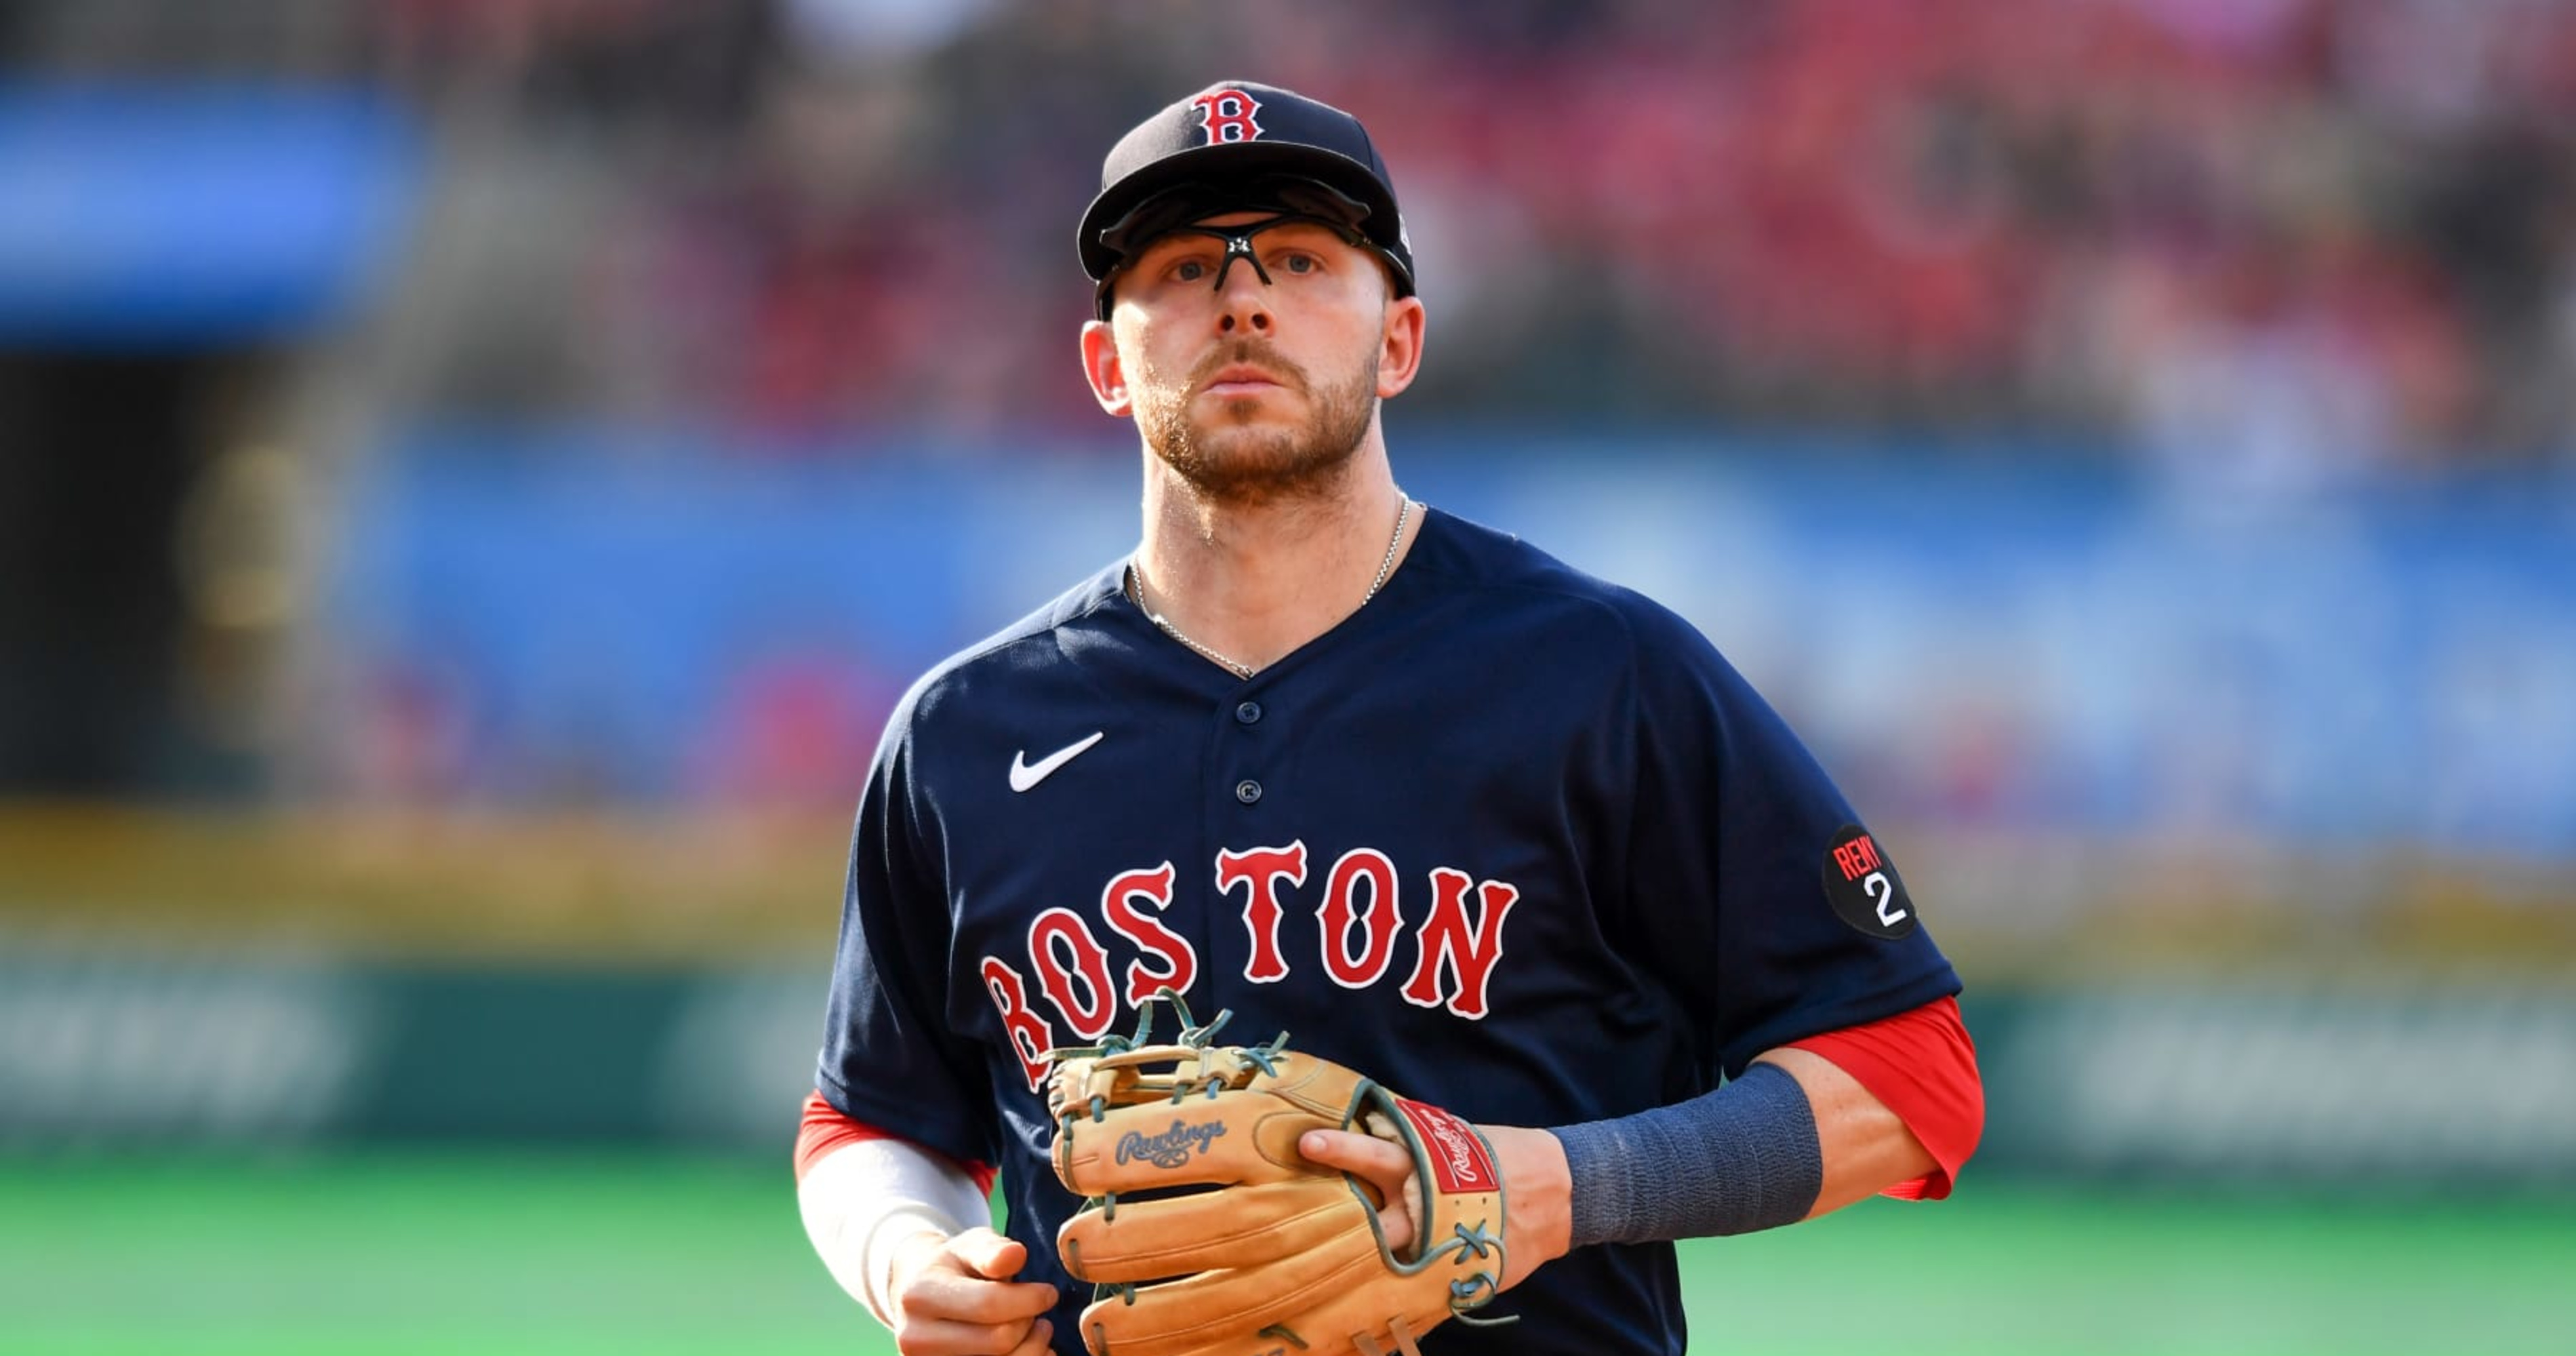 Could the Red Sox expect Trevor Story back soon?